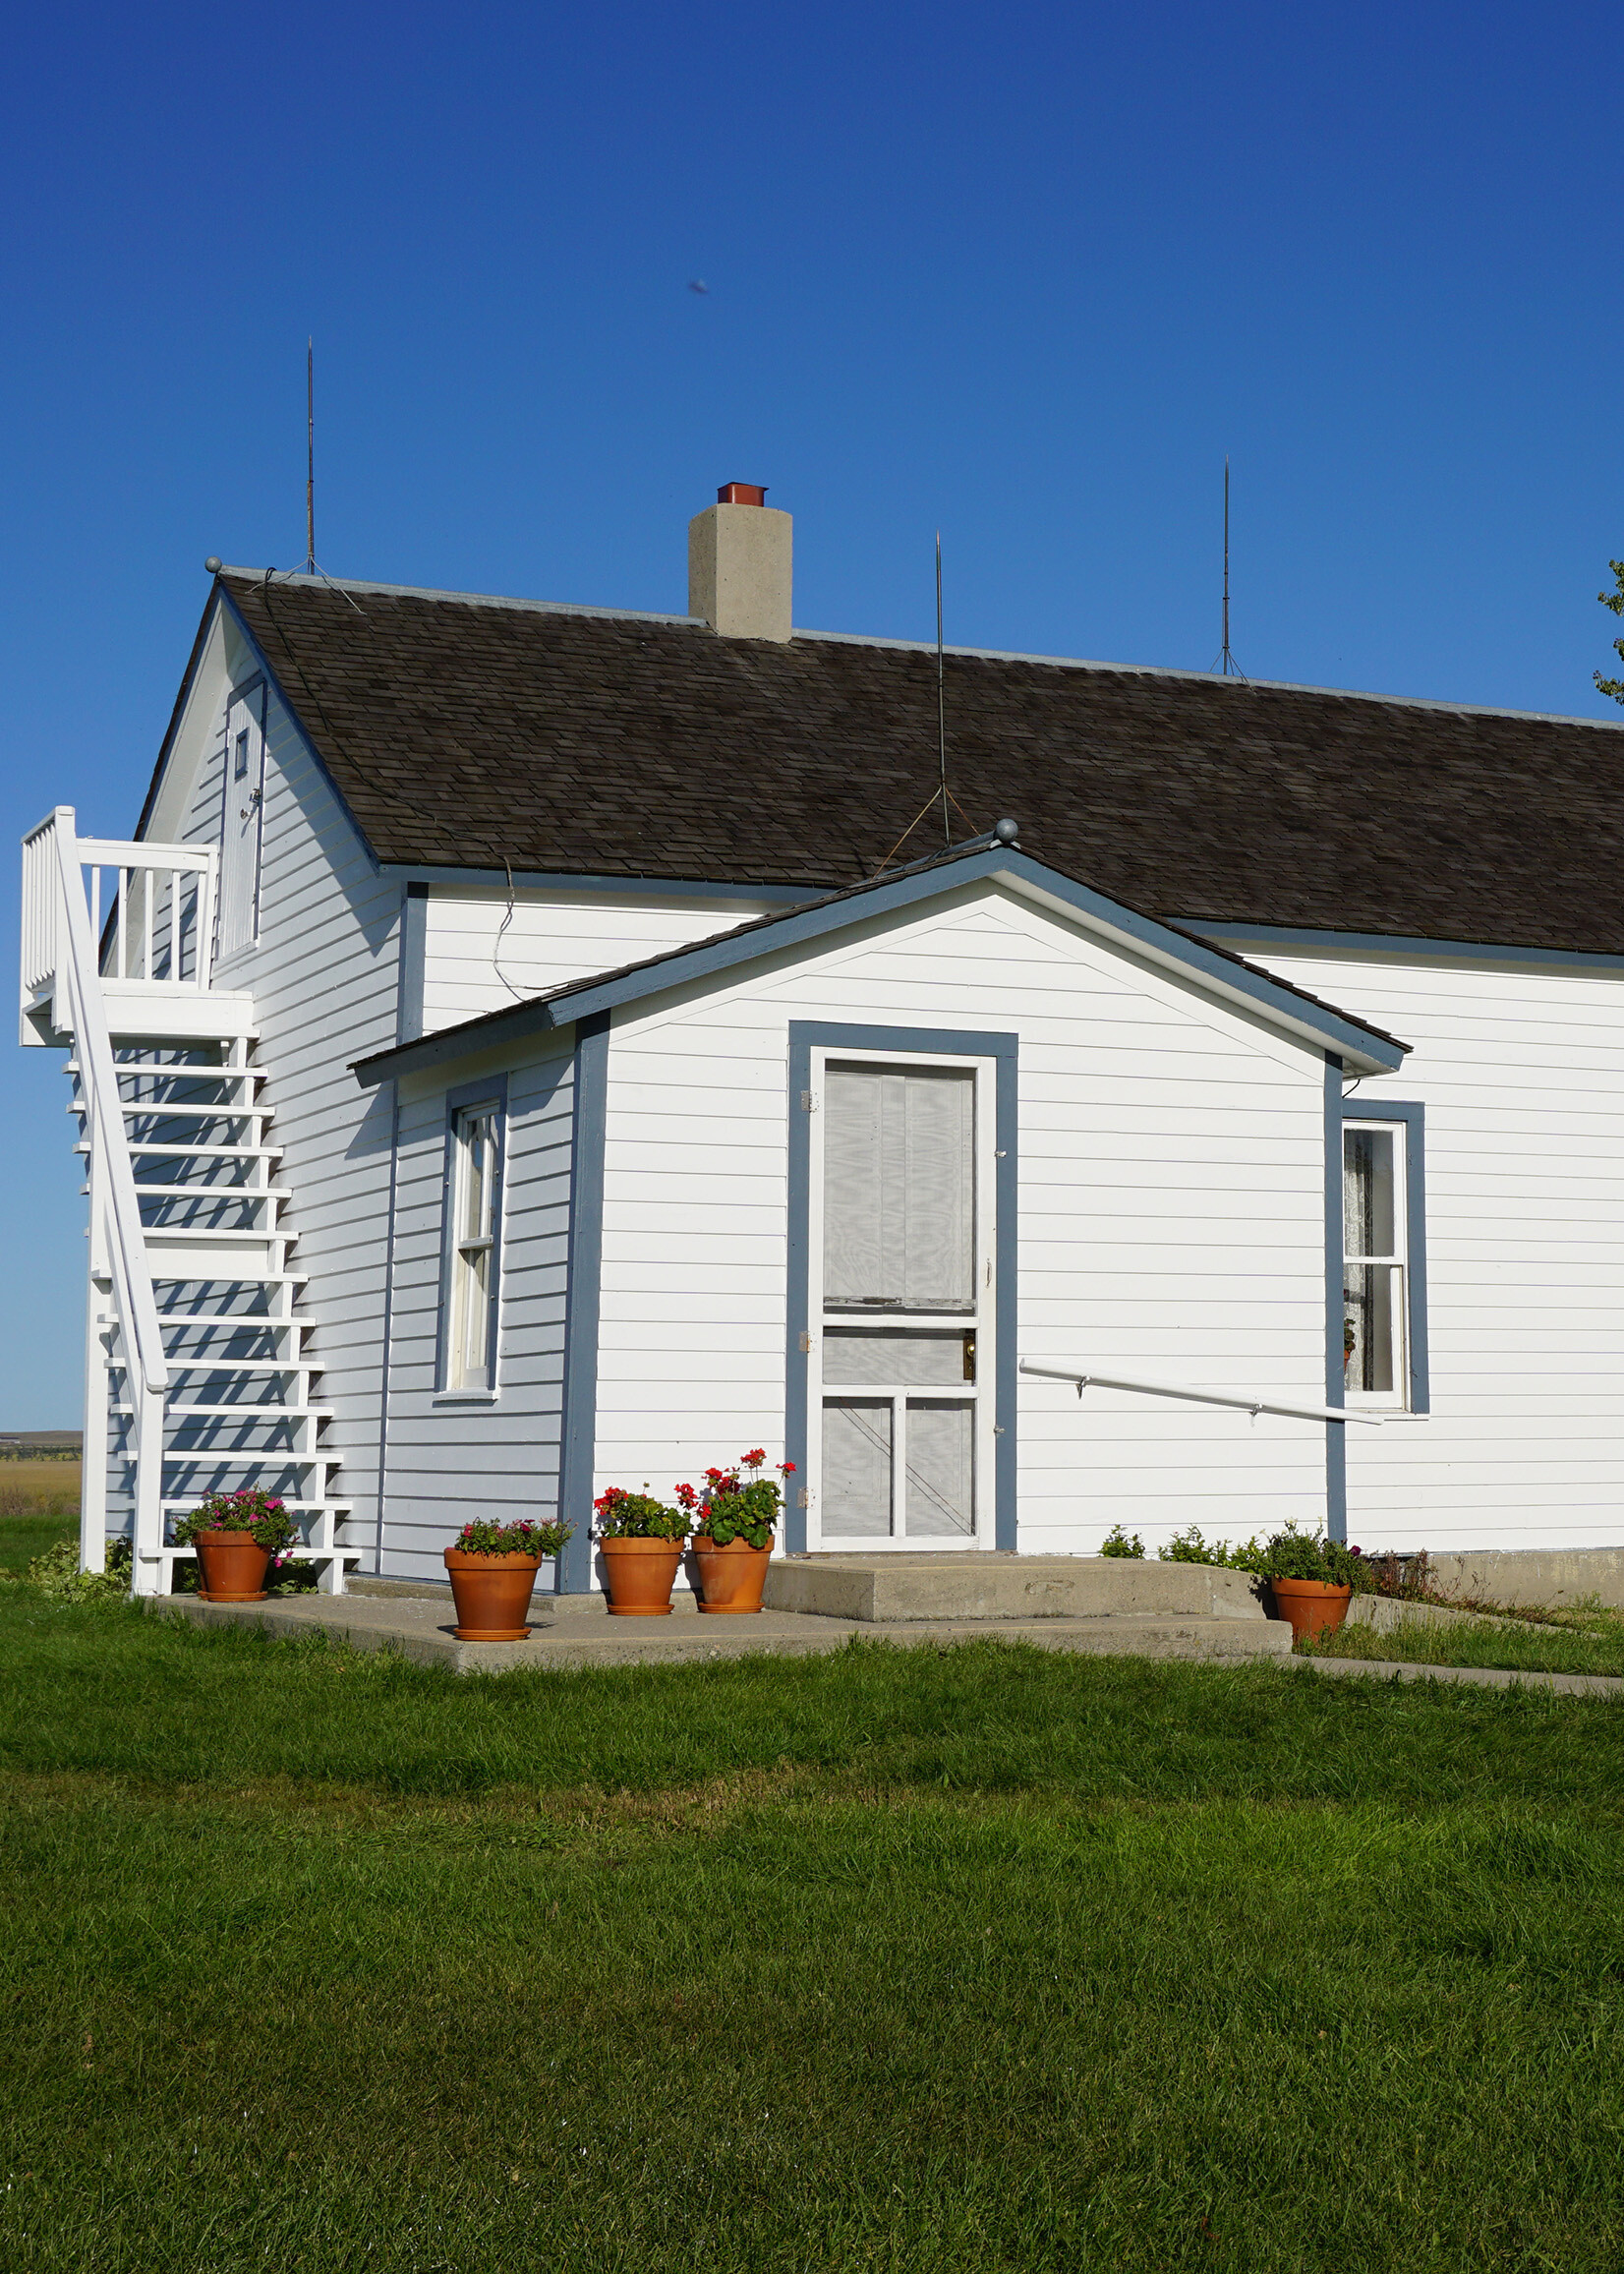 Donate - Welk Homestead State Historic Site